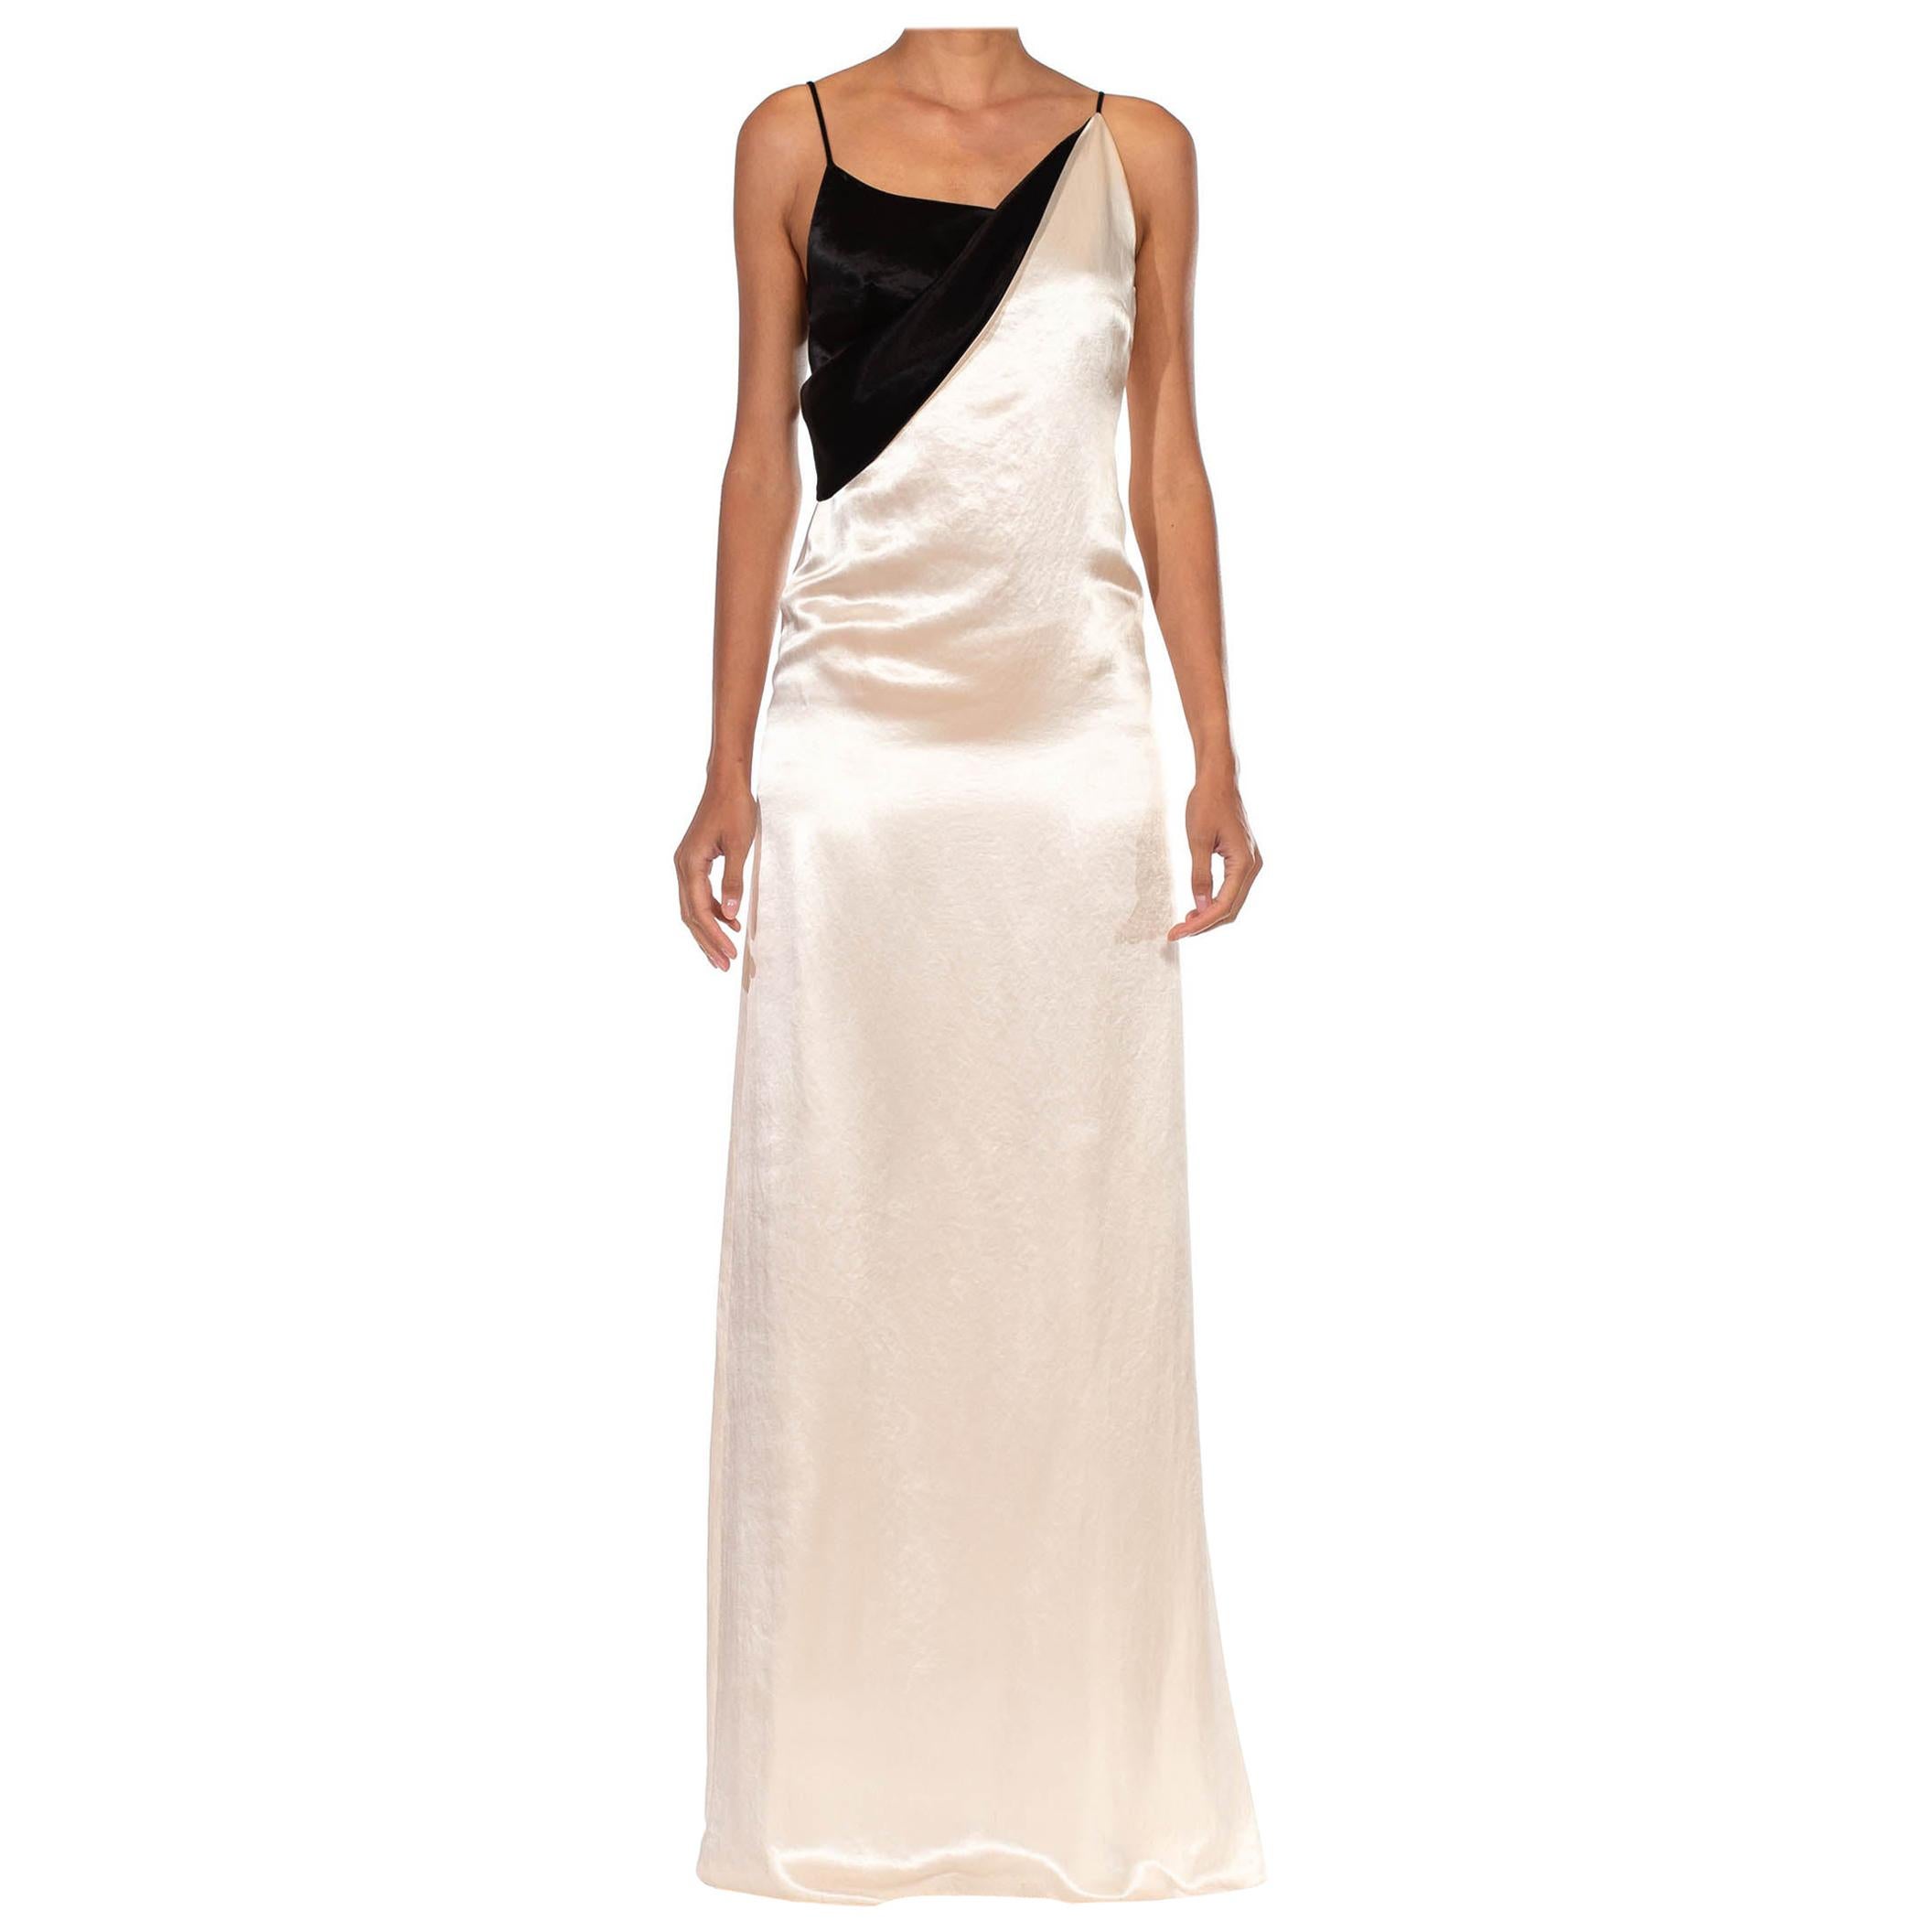 What is a draped gown?